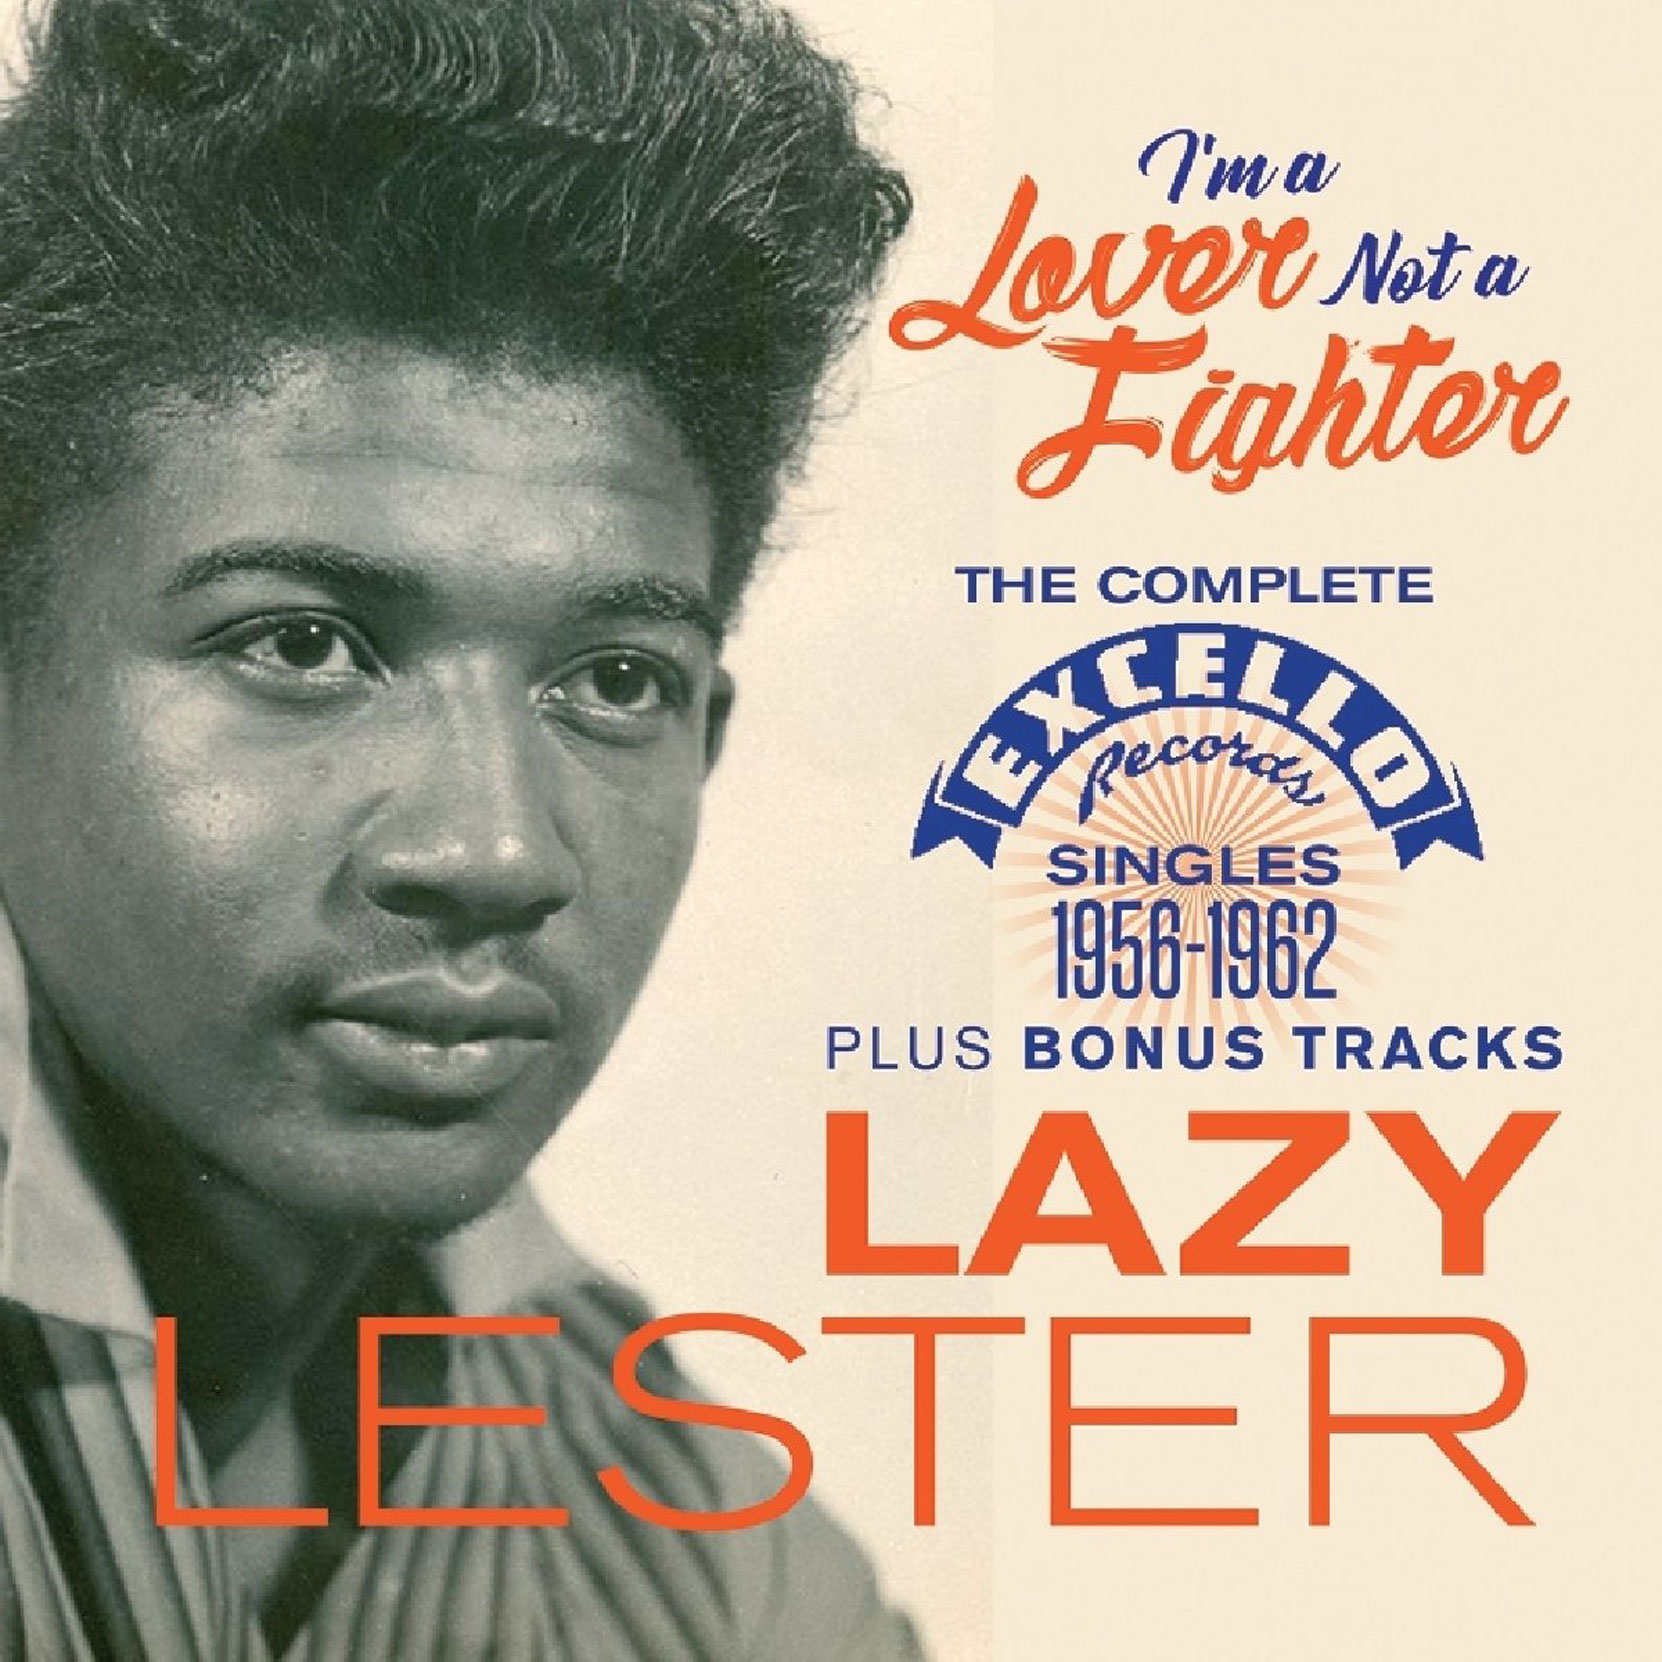 Lazy Lester - I'm A Lover Not A Fighter: The Complete Excello Singles 1958-1962, released on Jasmine Records. CD cover.